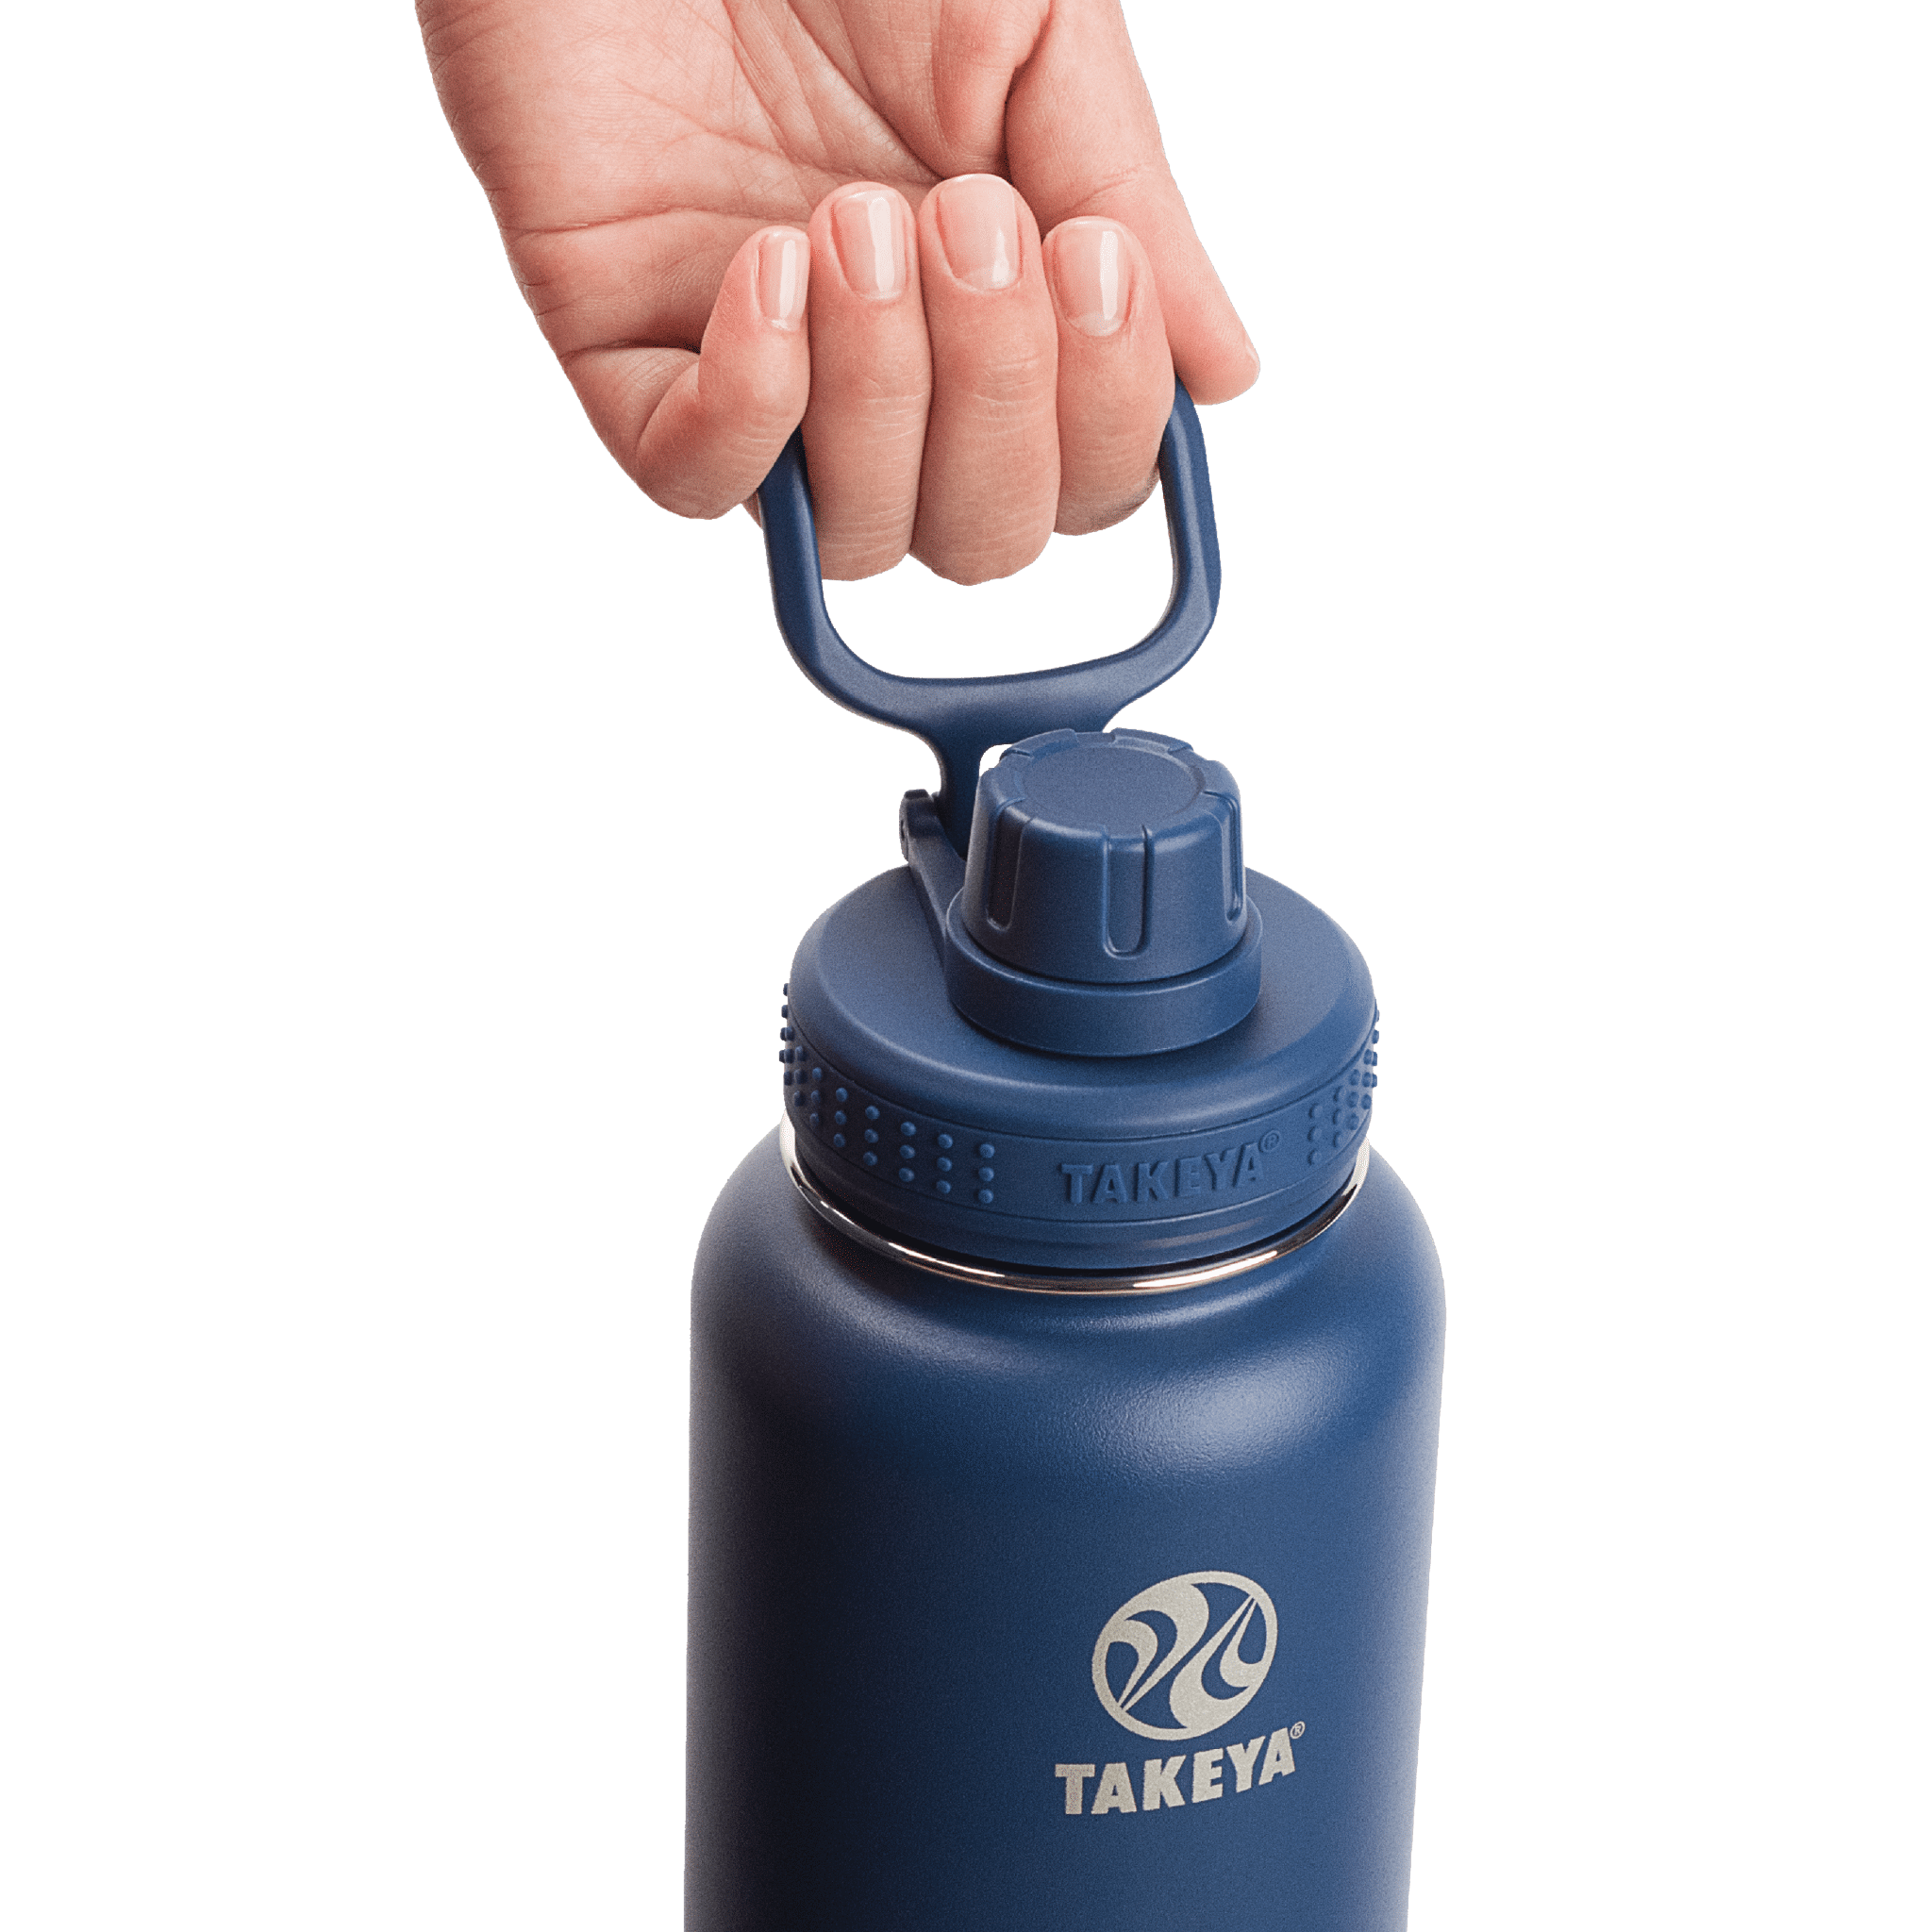 Takeya Actives Insulated Stainless Steel Spout Lid Teal Water Bottle, 24 oz  - Kroger